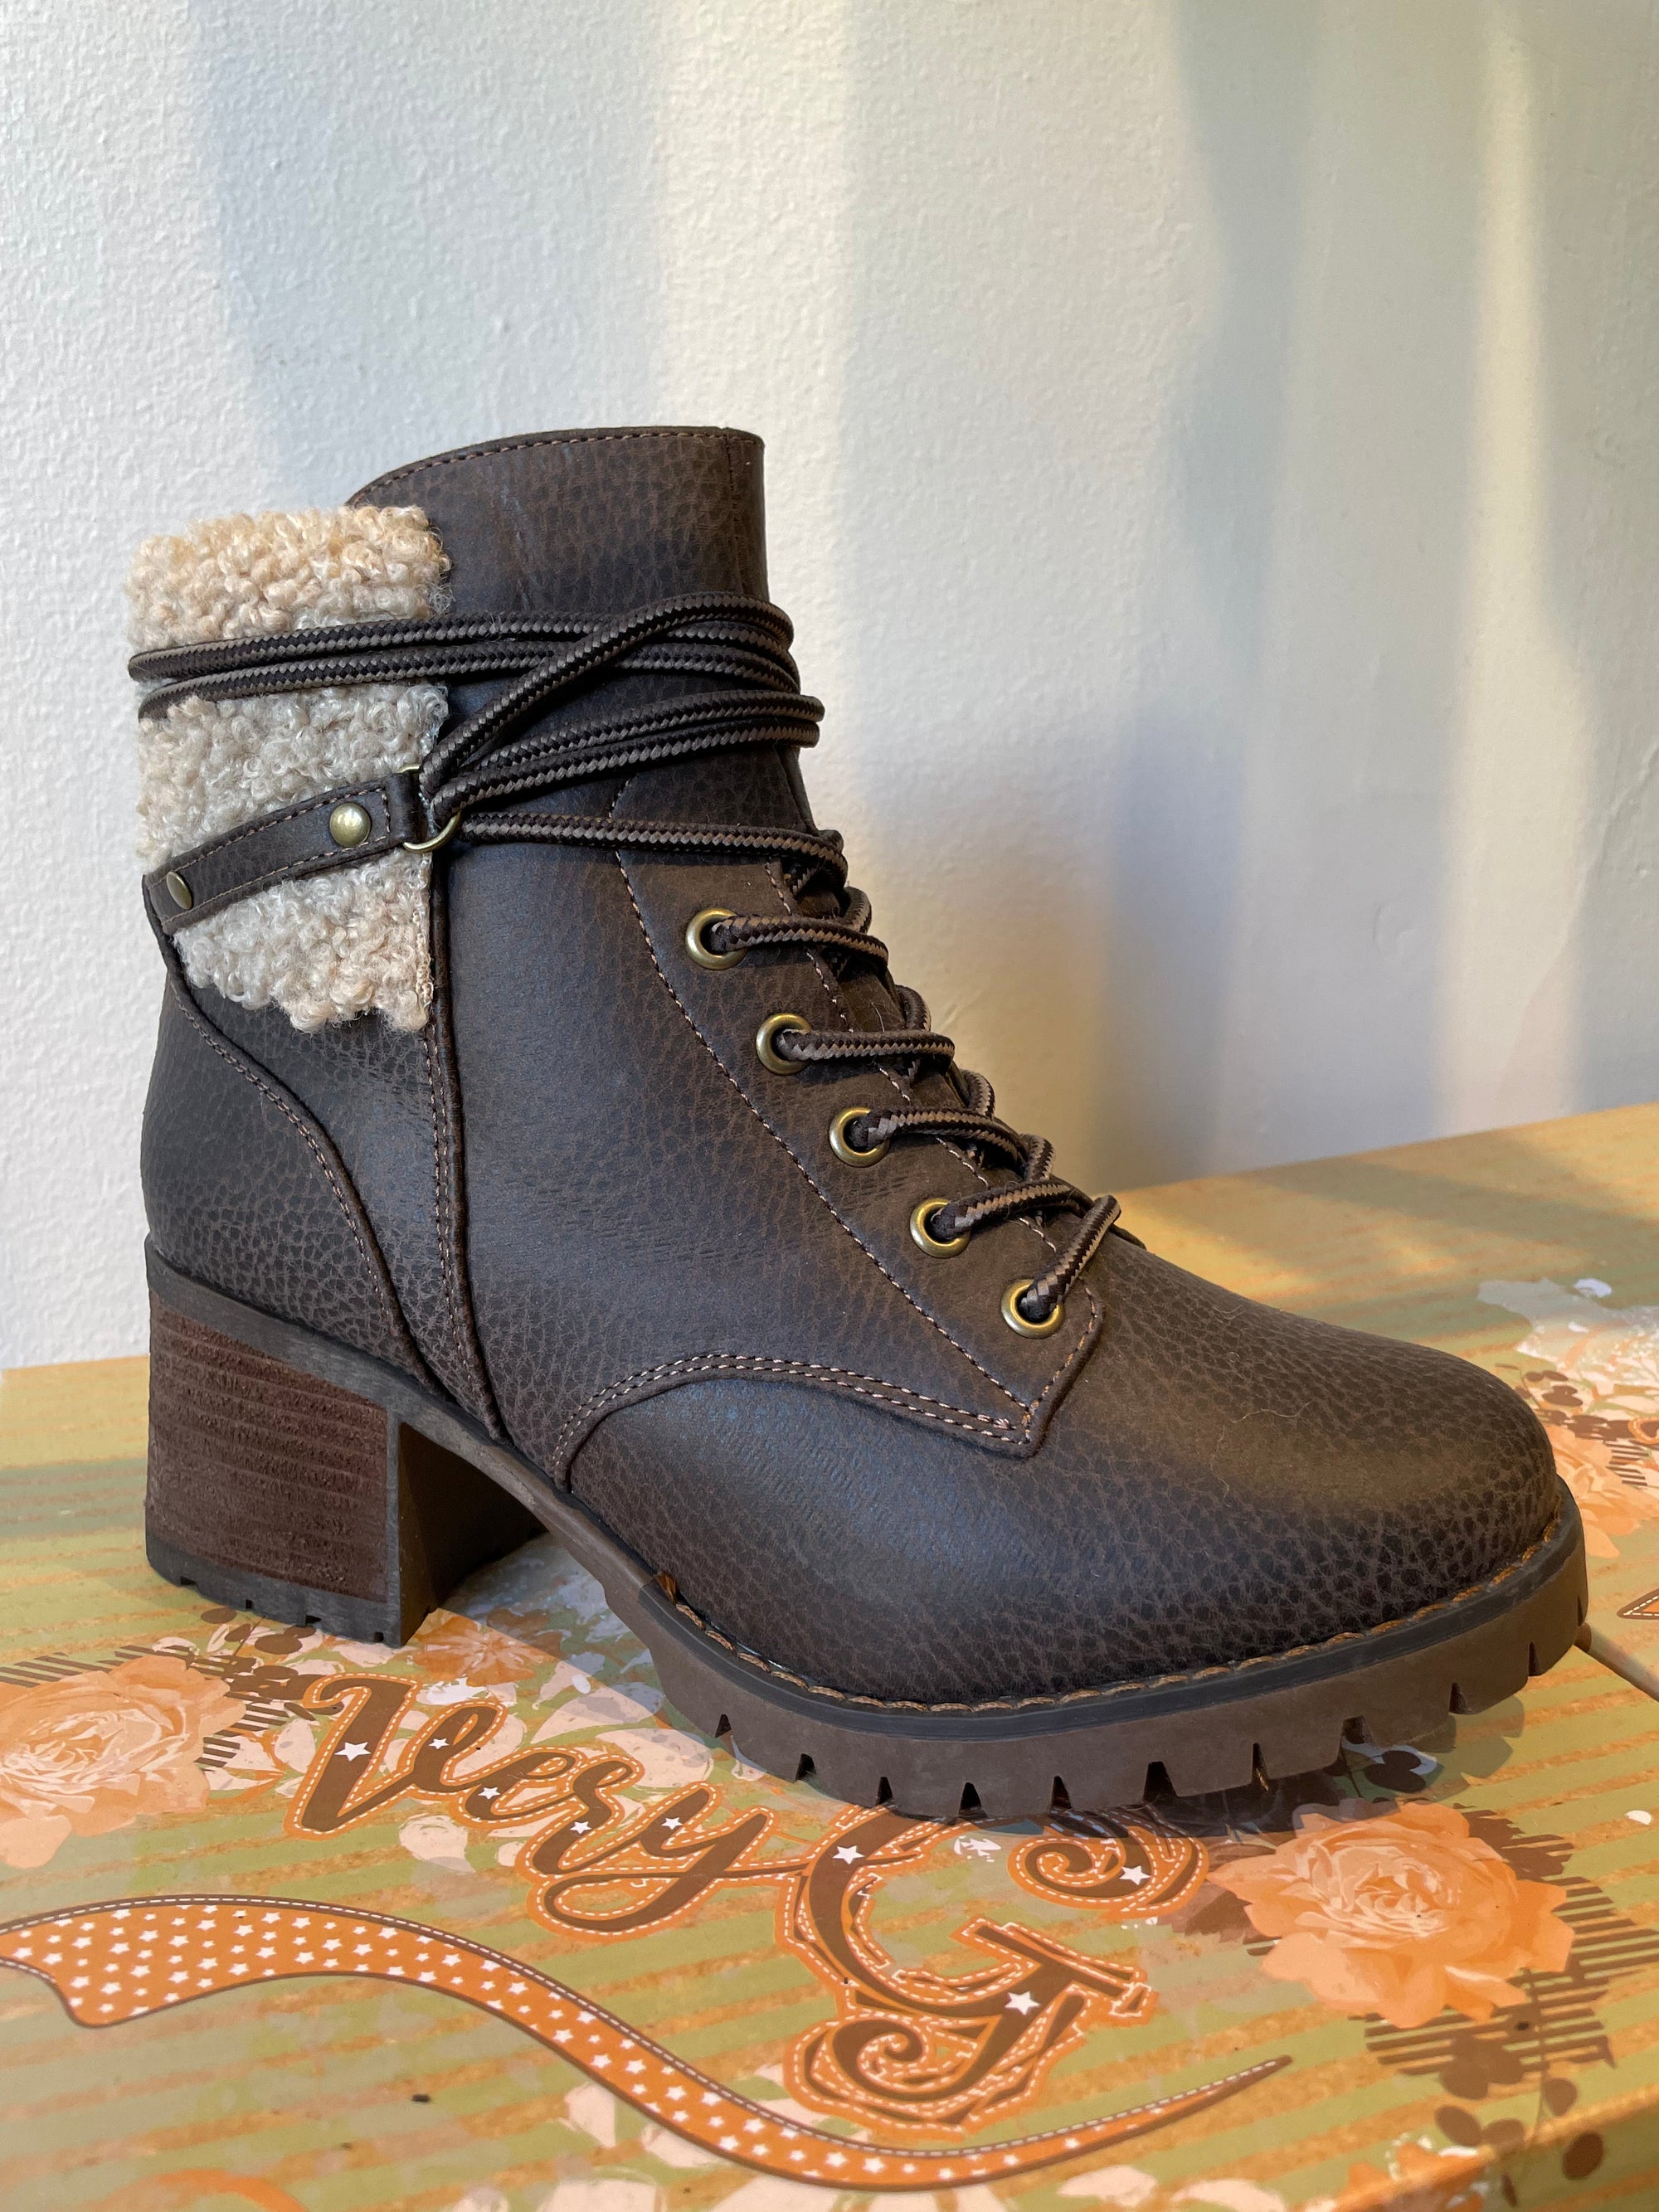 Olivia Chocolate Lace Up Combat Boots Shoes Very G 